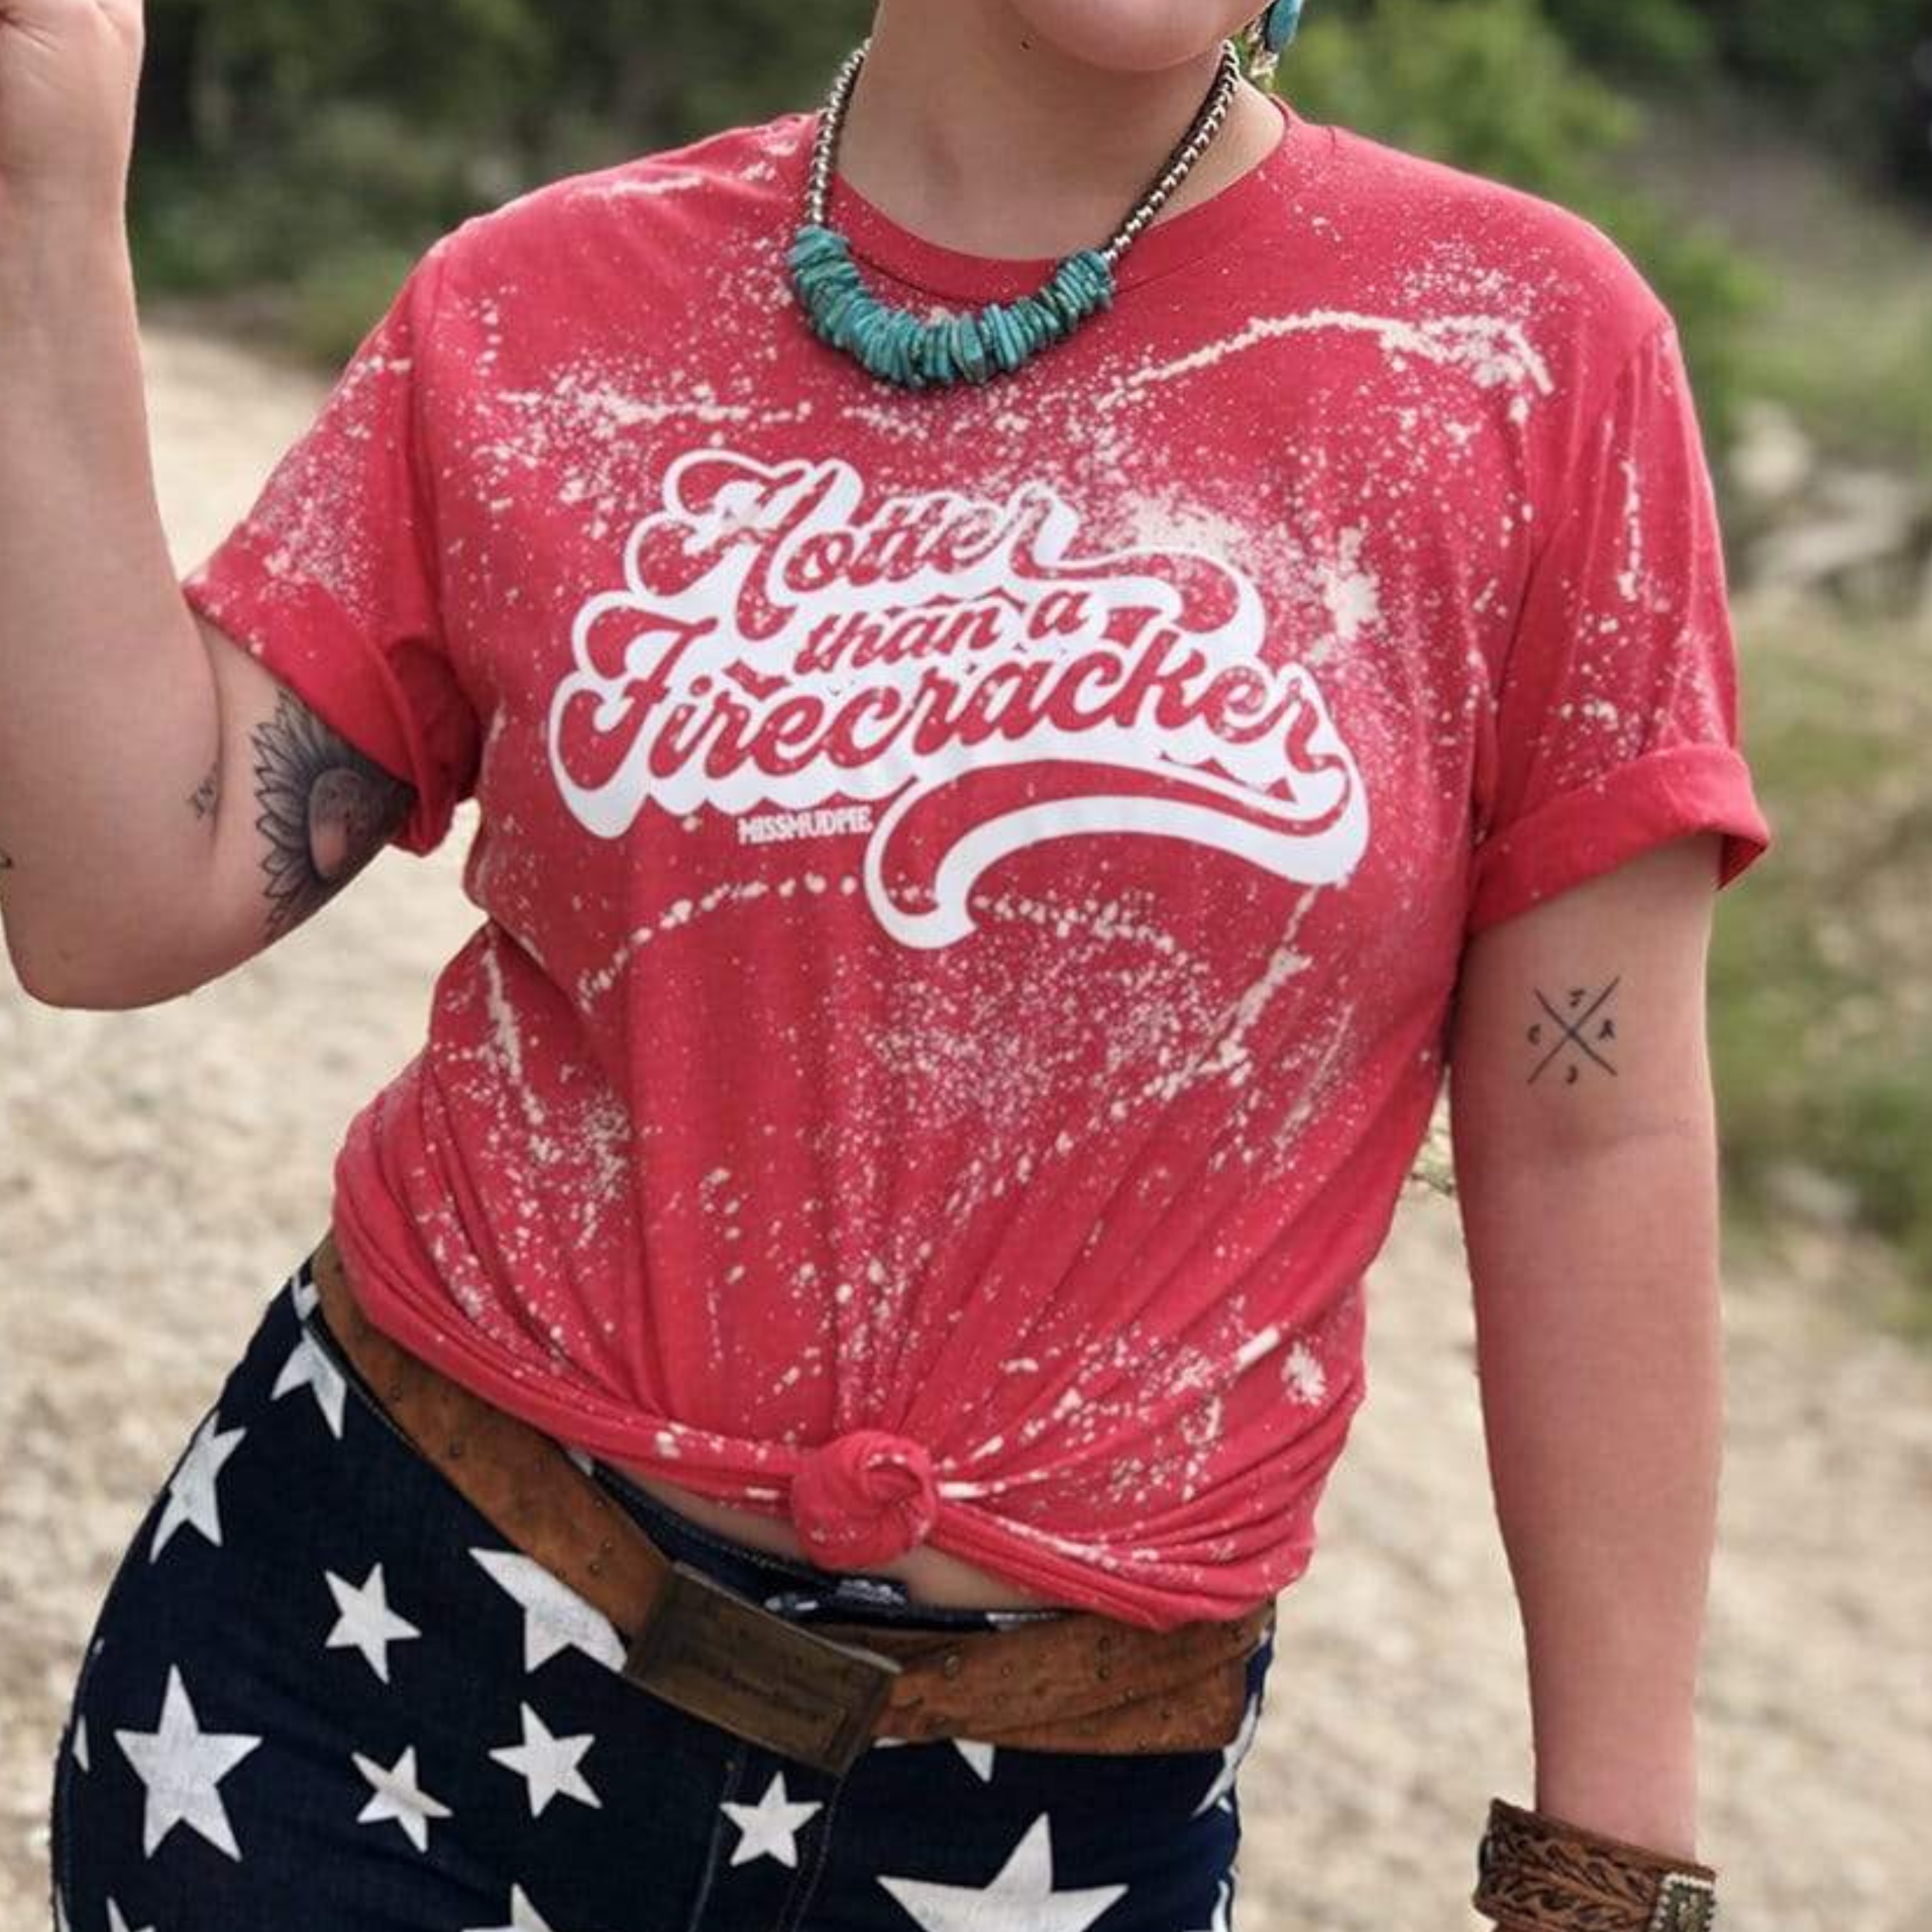  red short sleeve tee with a splatter paint design with the words "Hotter than a firecracker" in cursive in the center. Item is pictured on a beige and green background